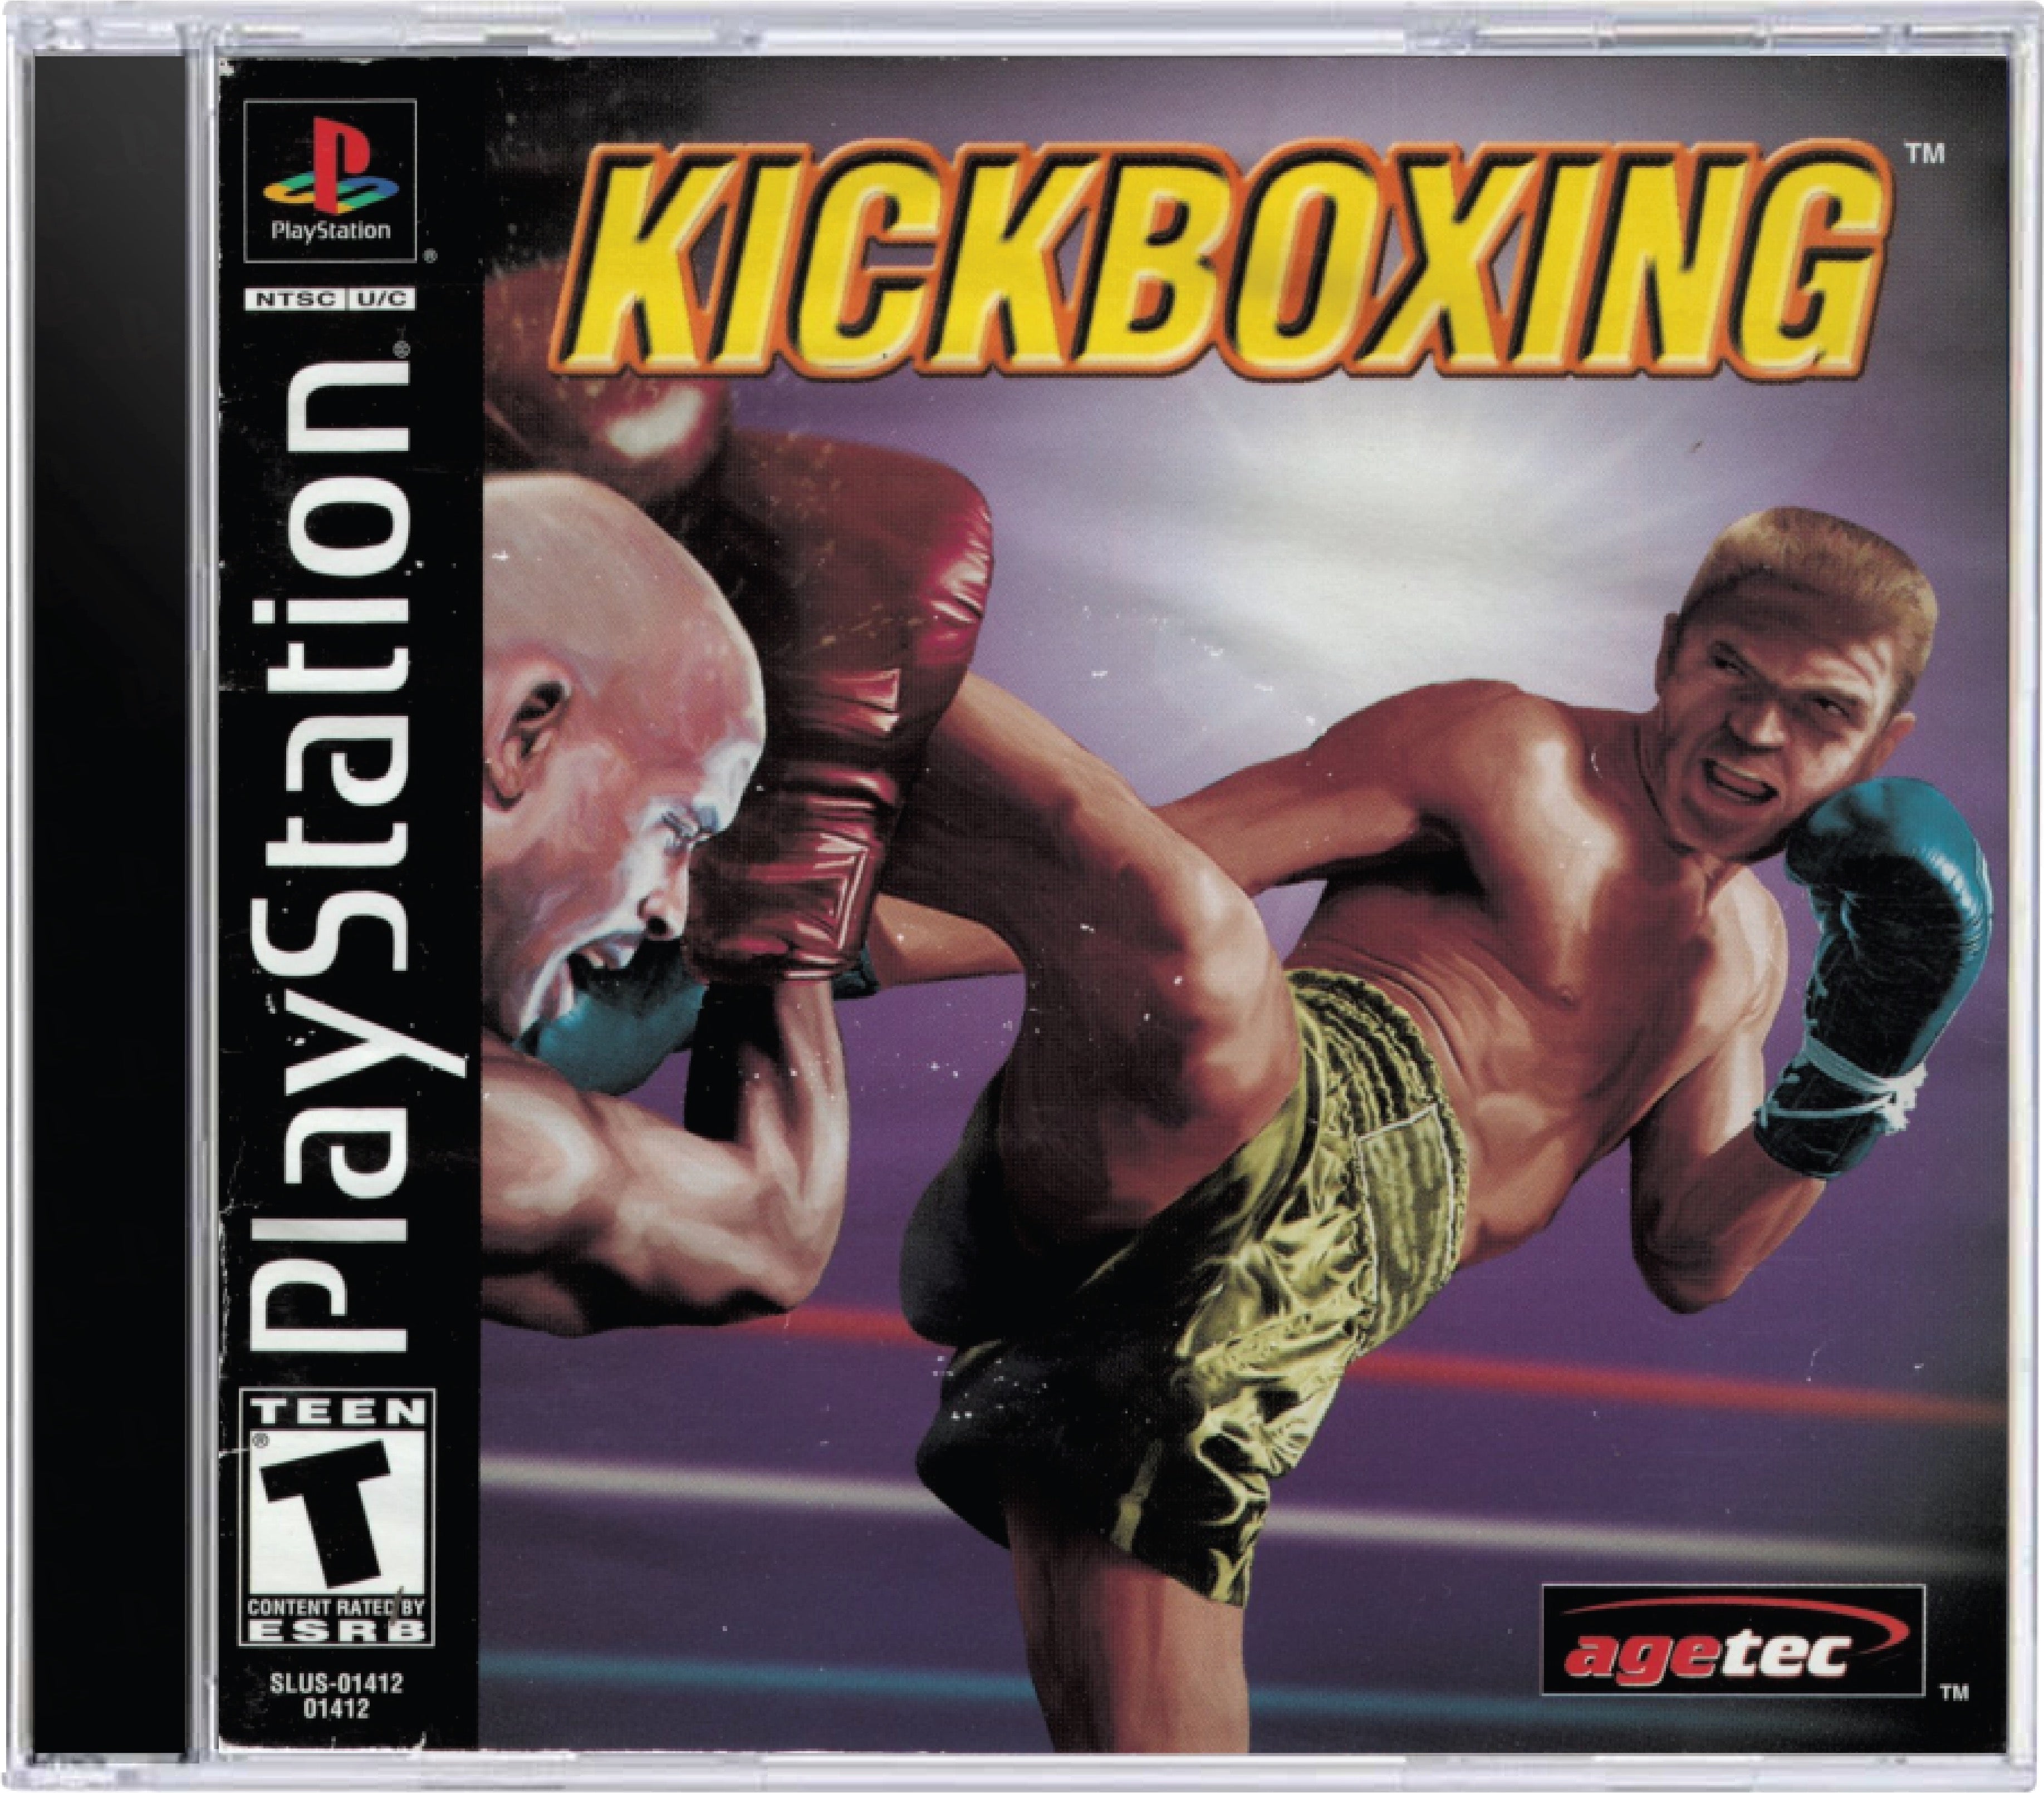 Kickboxing Cover Art and Product Photo